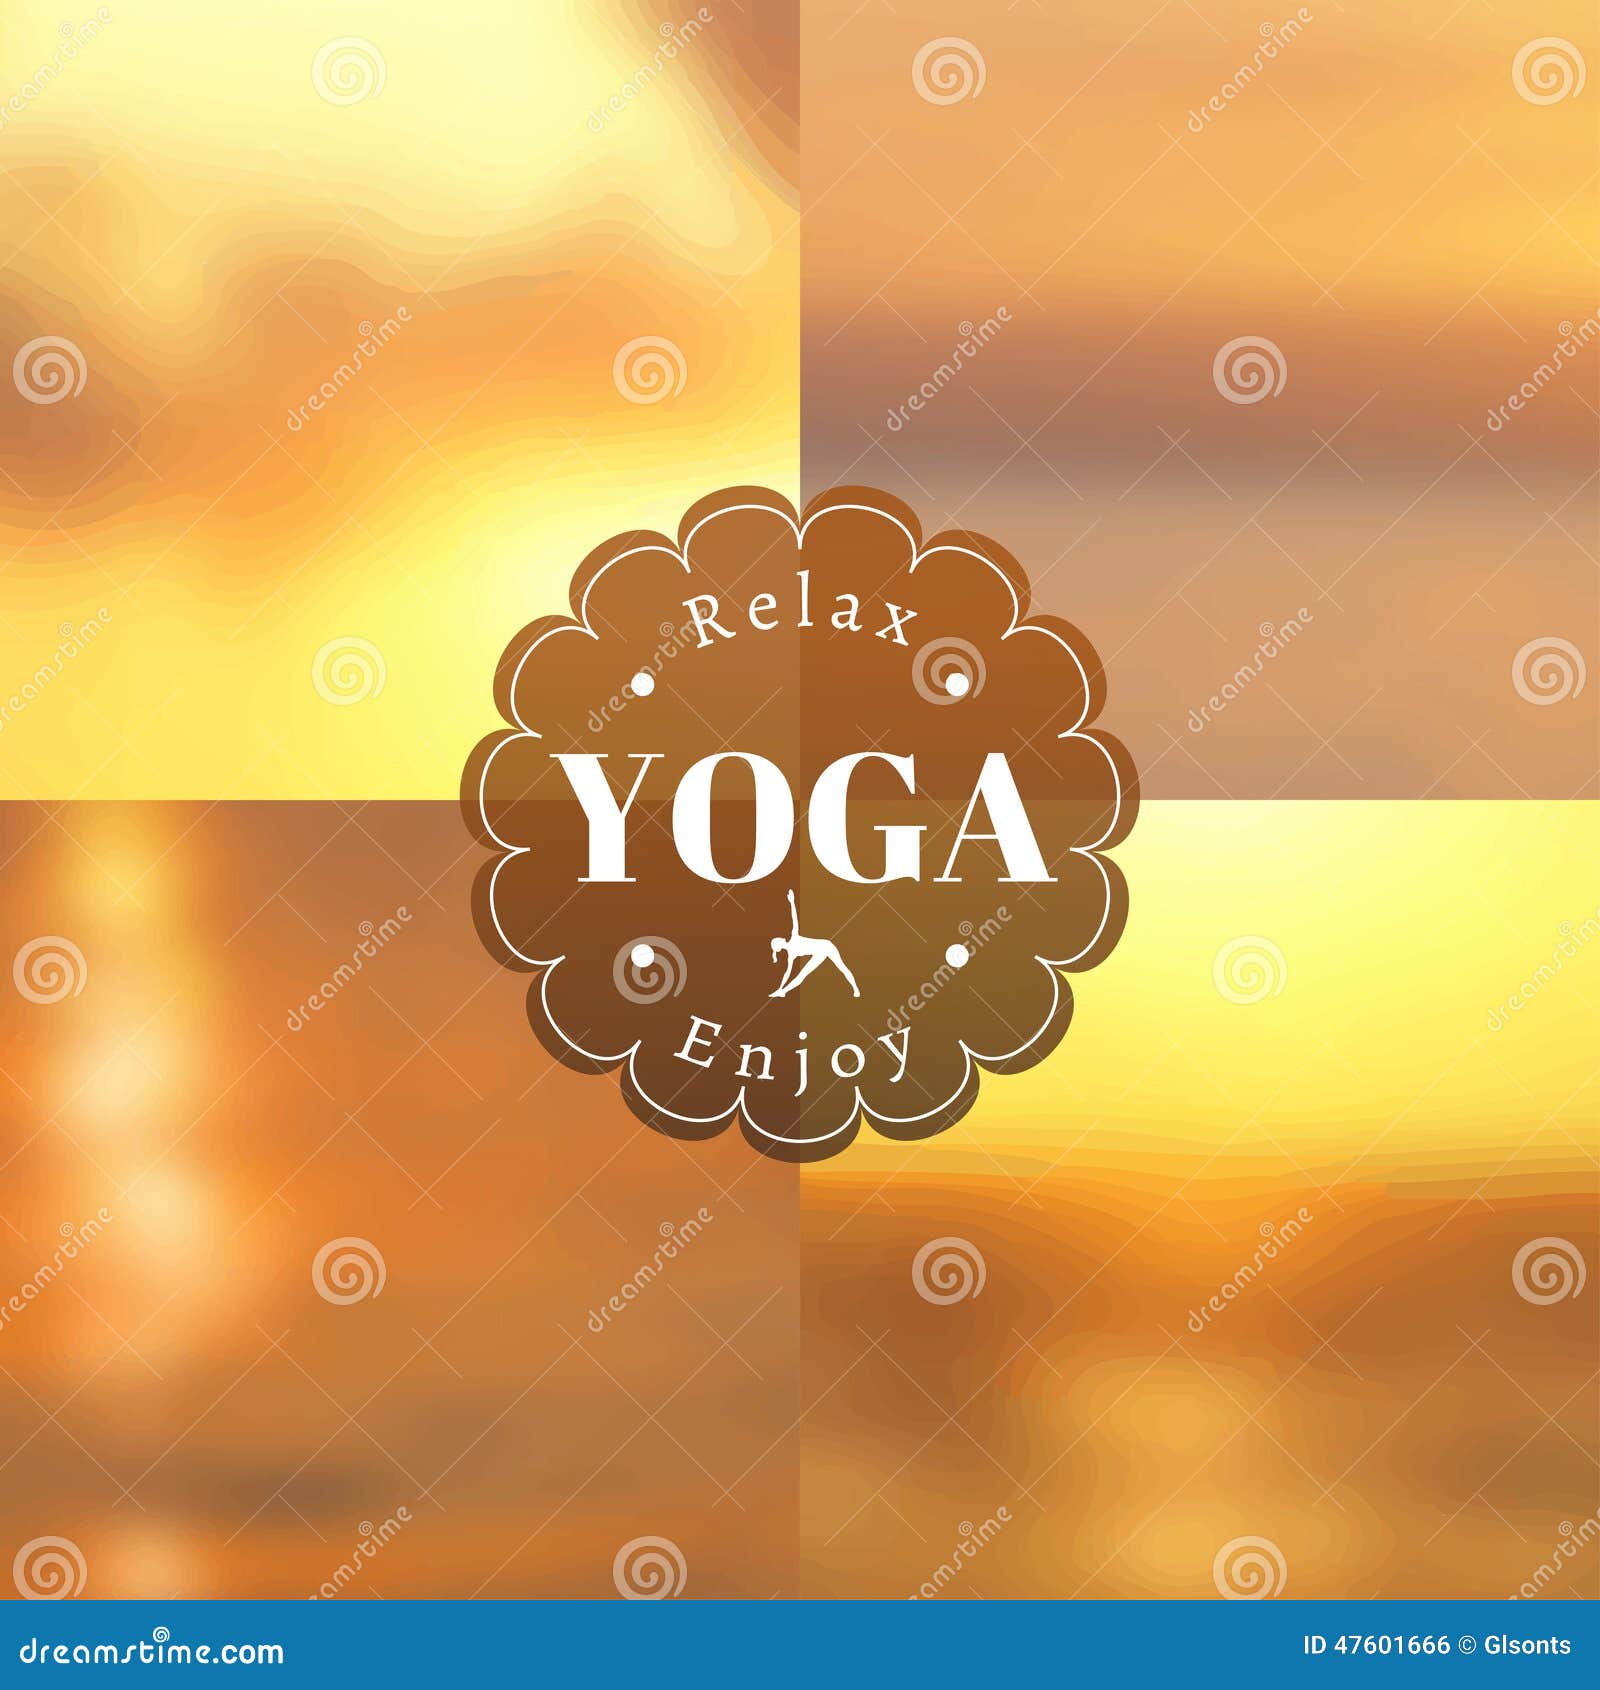 Yoga Illustration. Set Of Textures And Logo For Yoga Posters. EPS,JPG ...